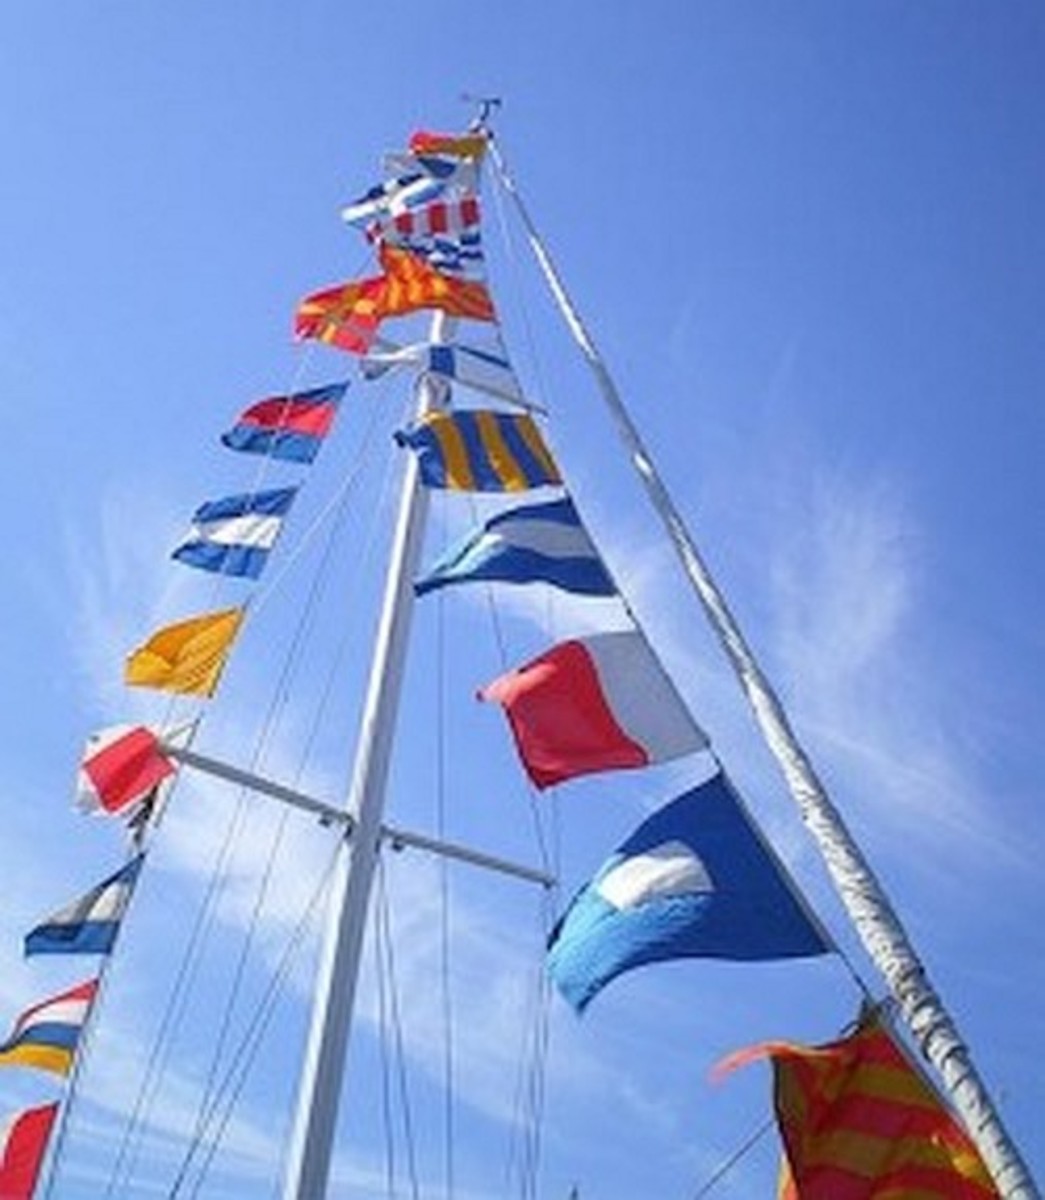 Flags are called colors on ships.